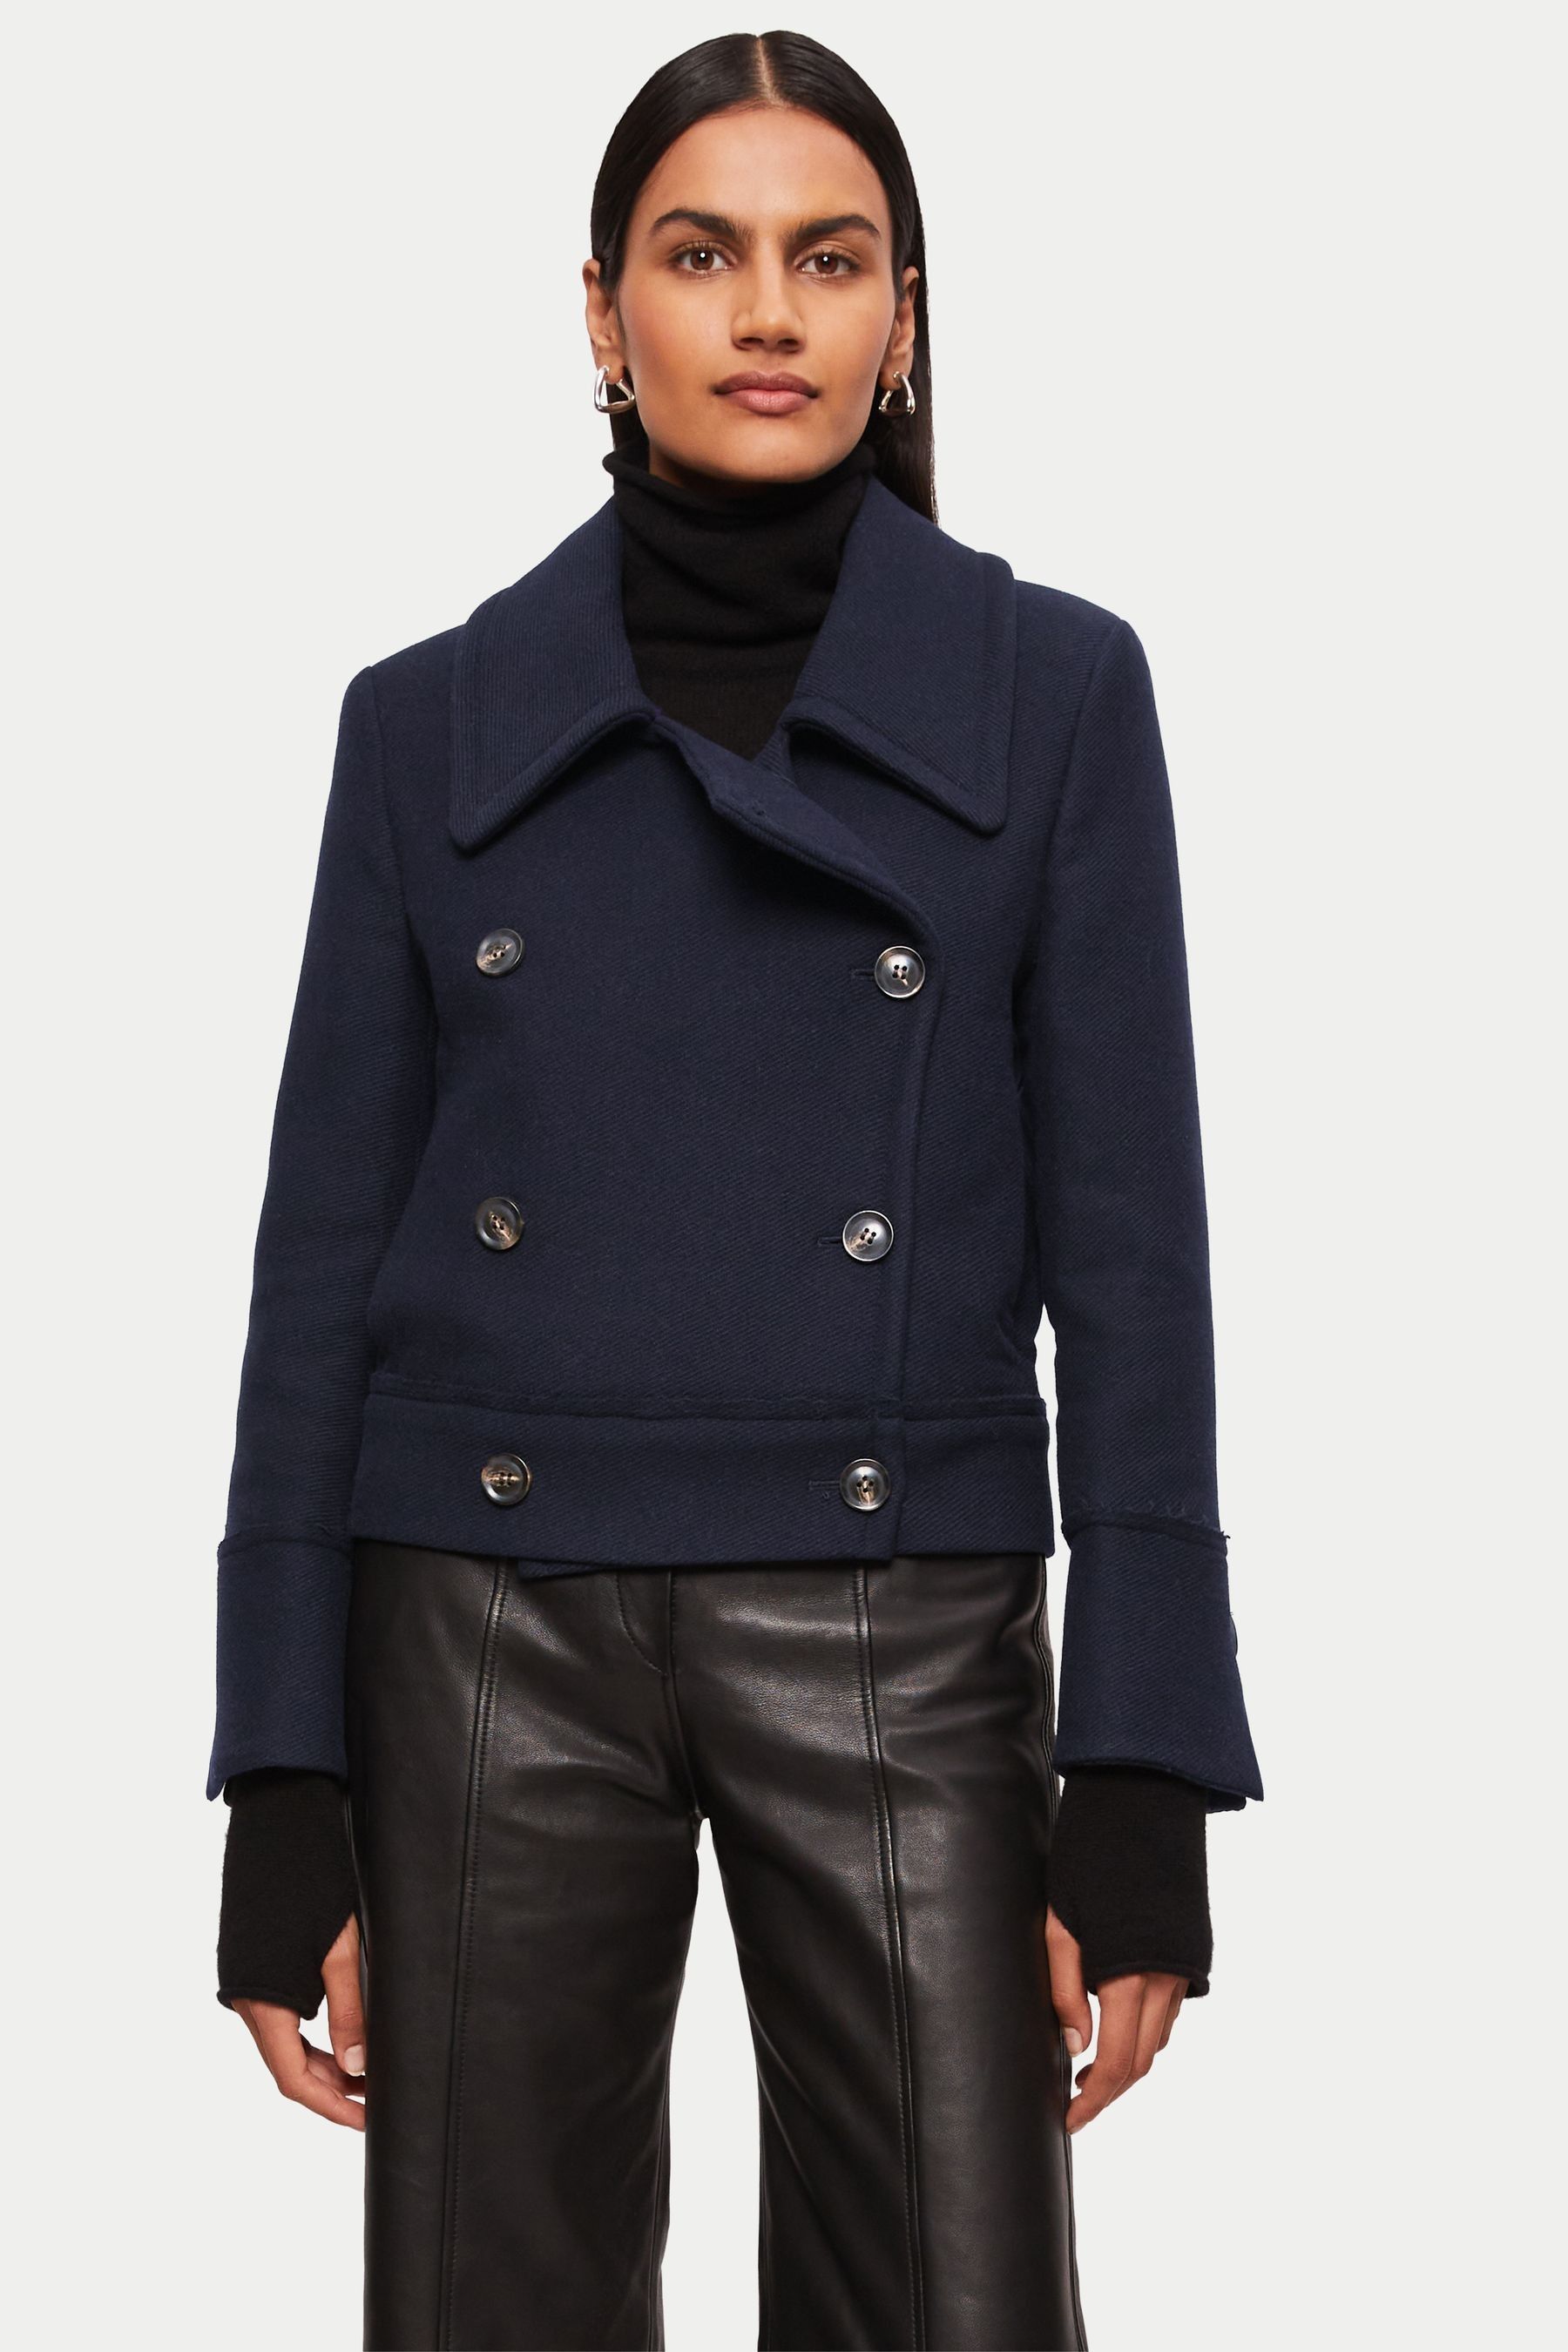 Buy Jigsaw Blue Modern Twill Pea Coat from the Next UK online shop